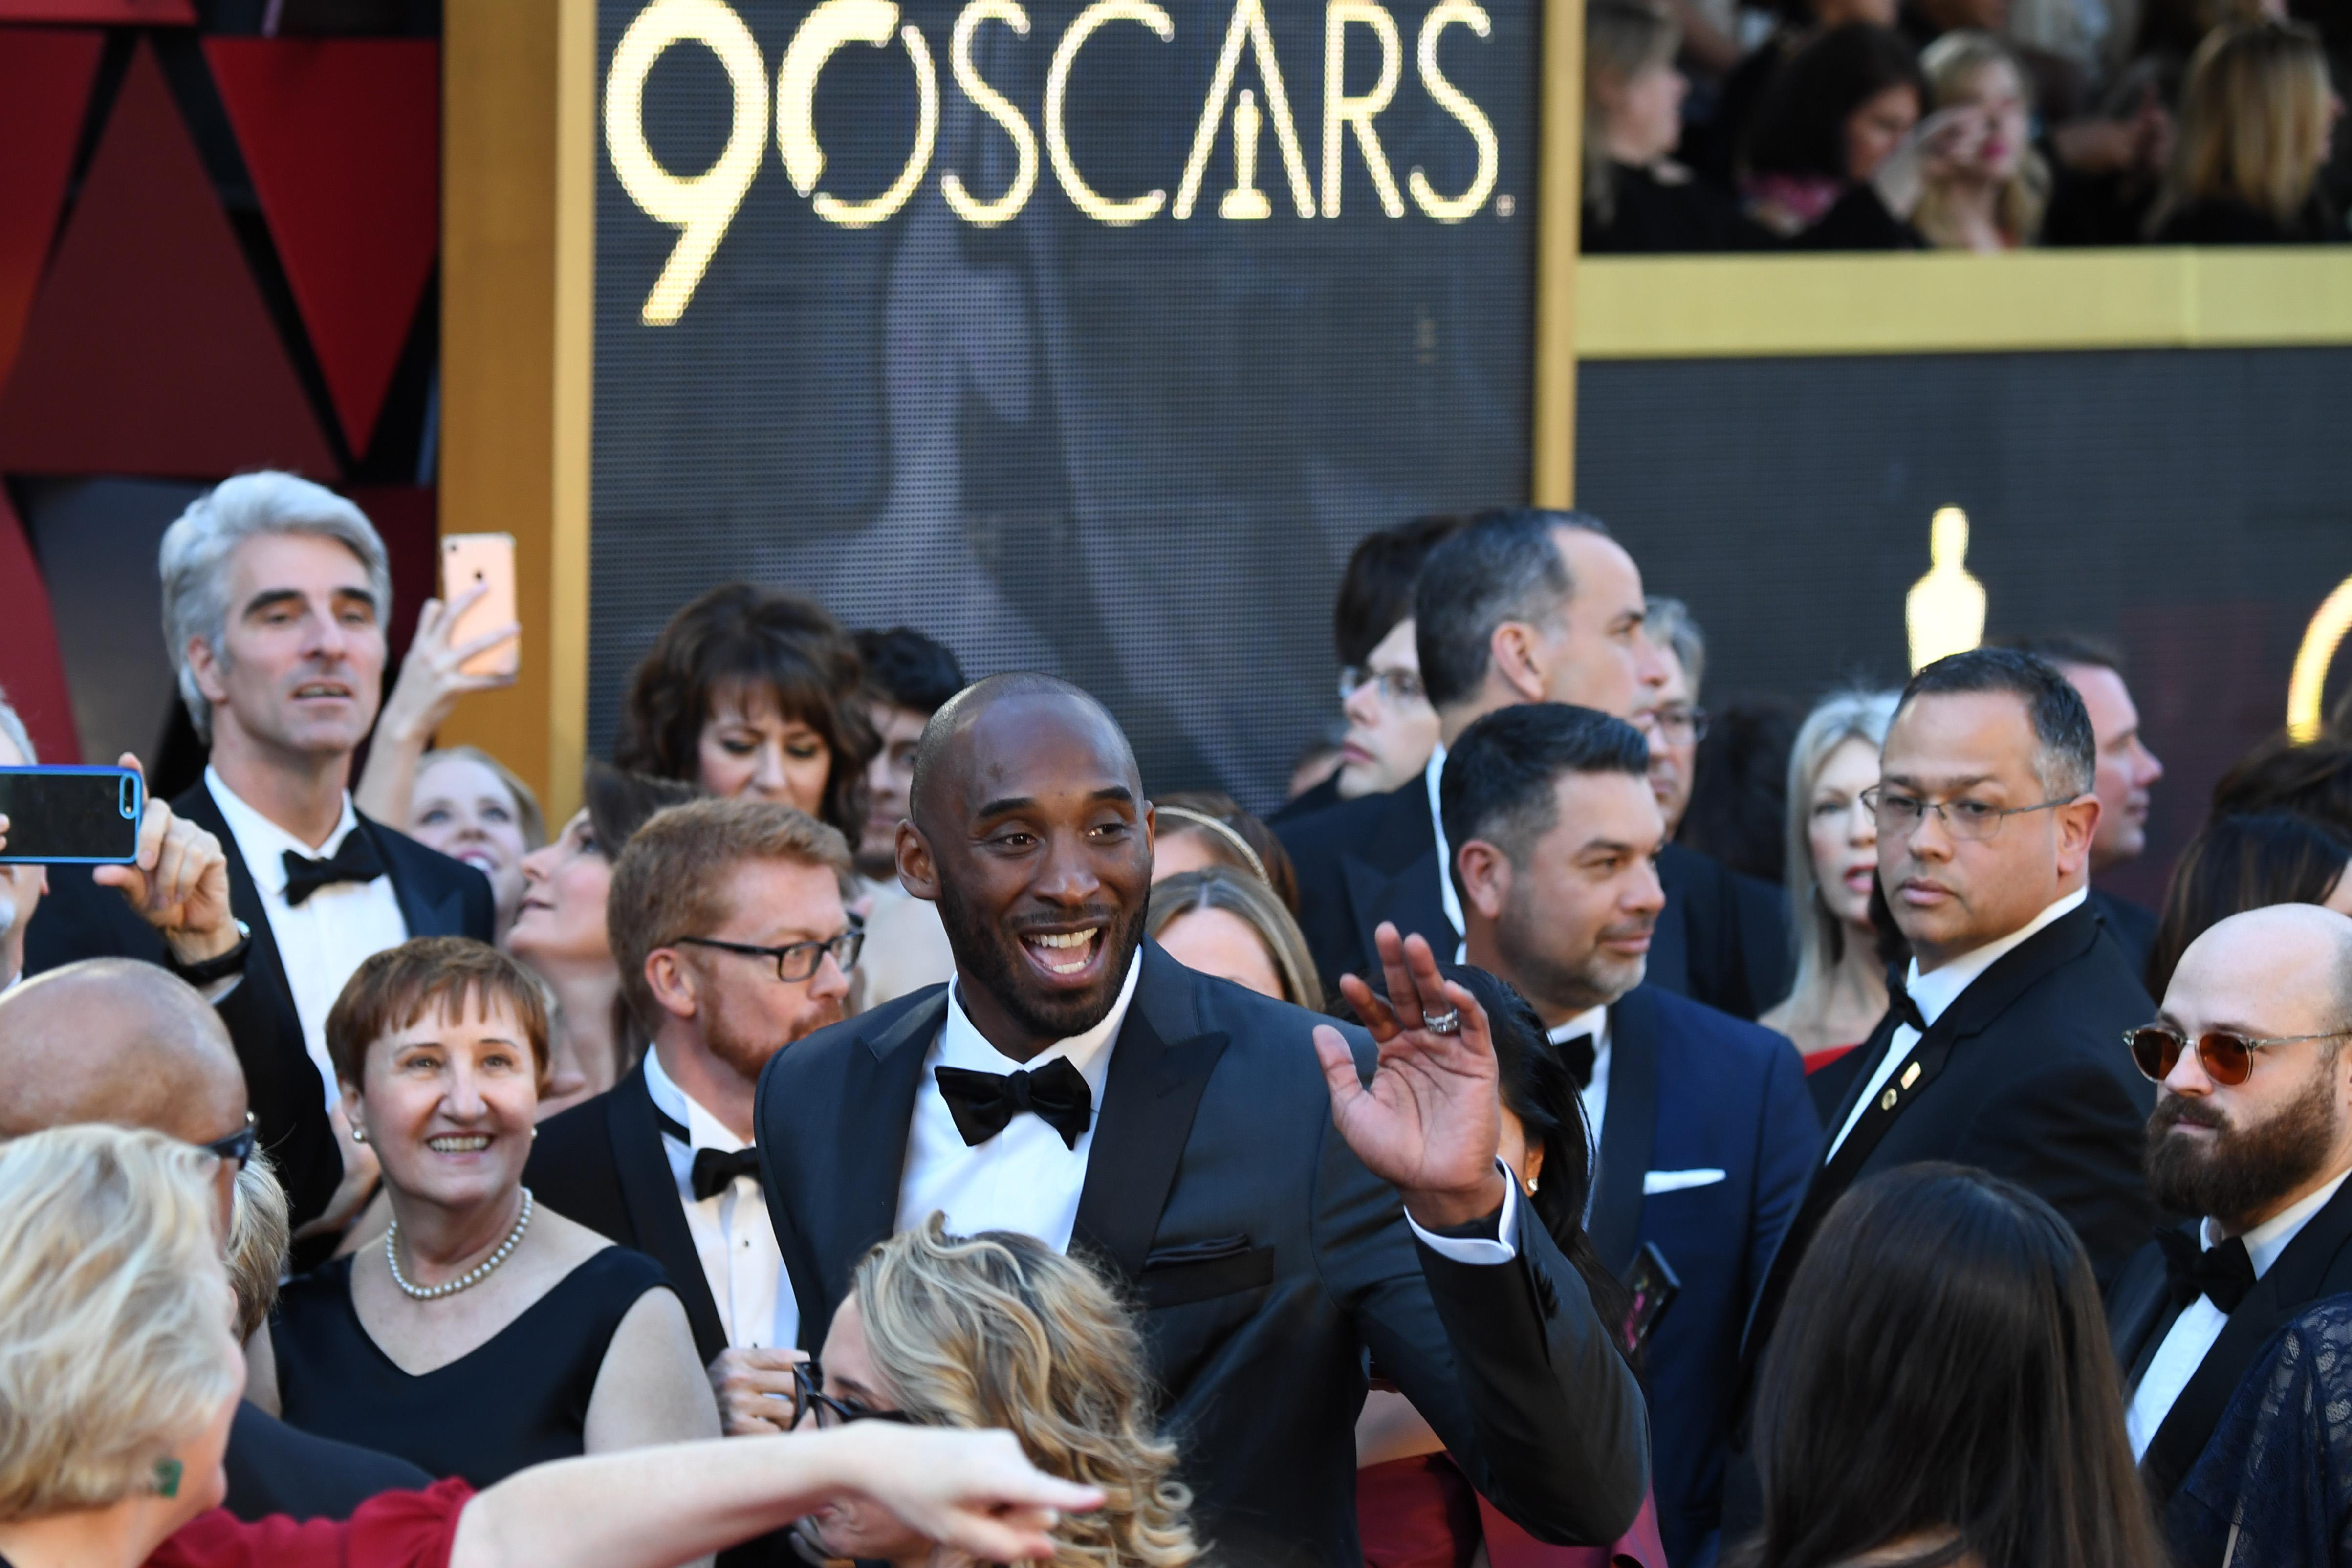 US basketball player Kobe Bryant arrives for the 90th Annual Academy Awards on March 4, 2018, in Hollywood, California.  / AFP PHOTO / Robyn Beck        (Photo credit should read ROBYN BECK/AFP/Getty Images)